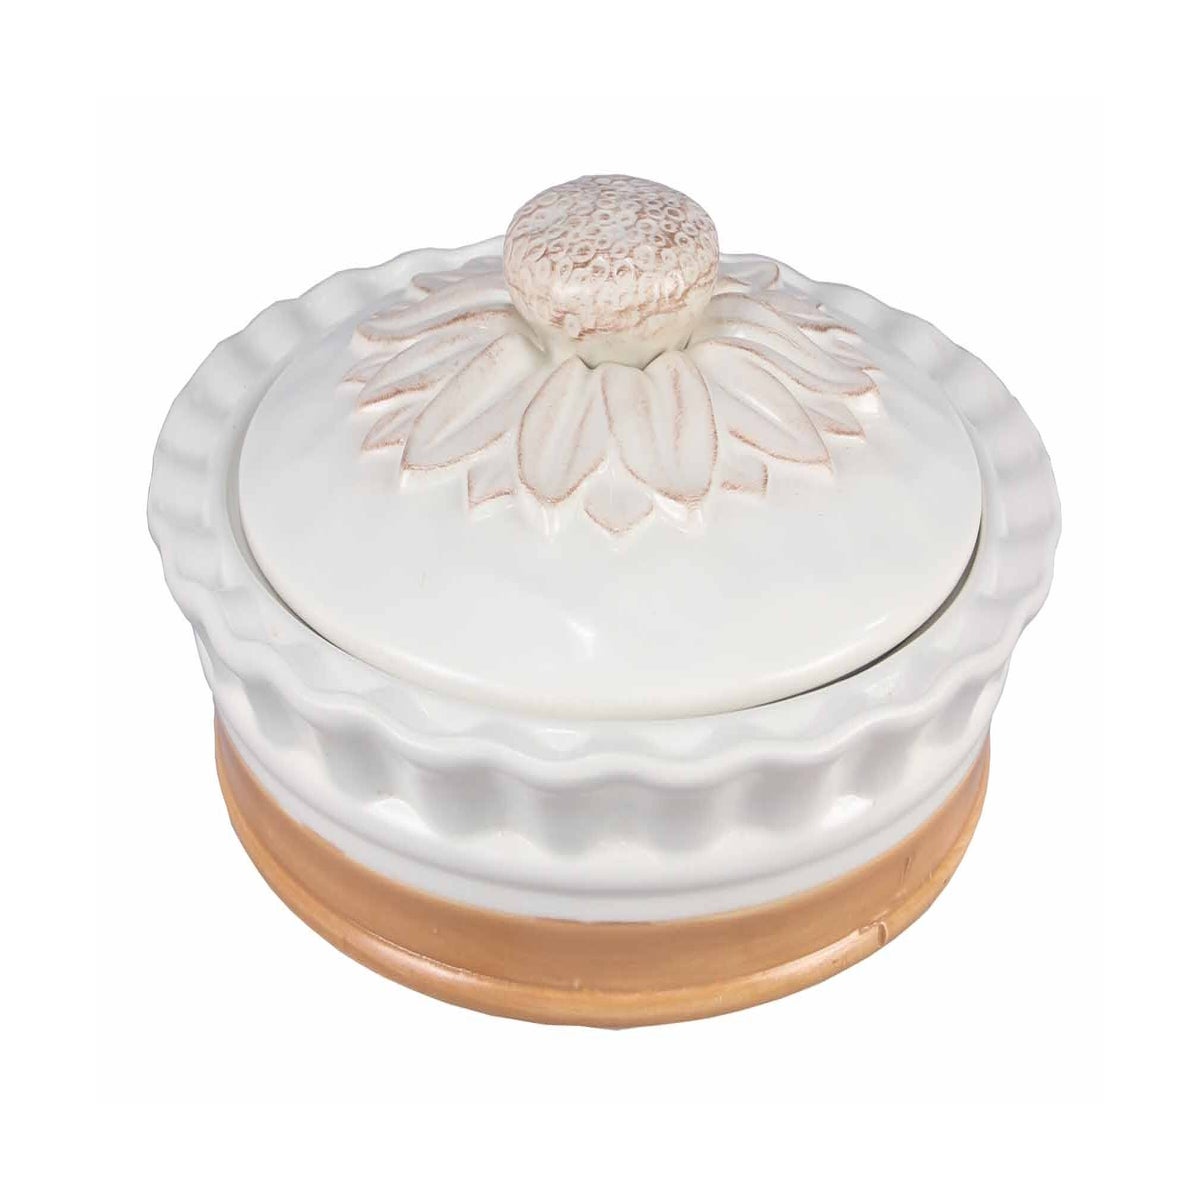 Ceramic Pie Plate with Lid